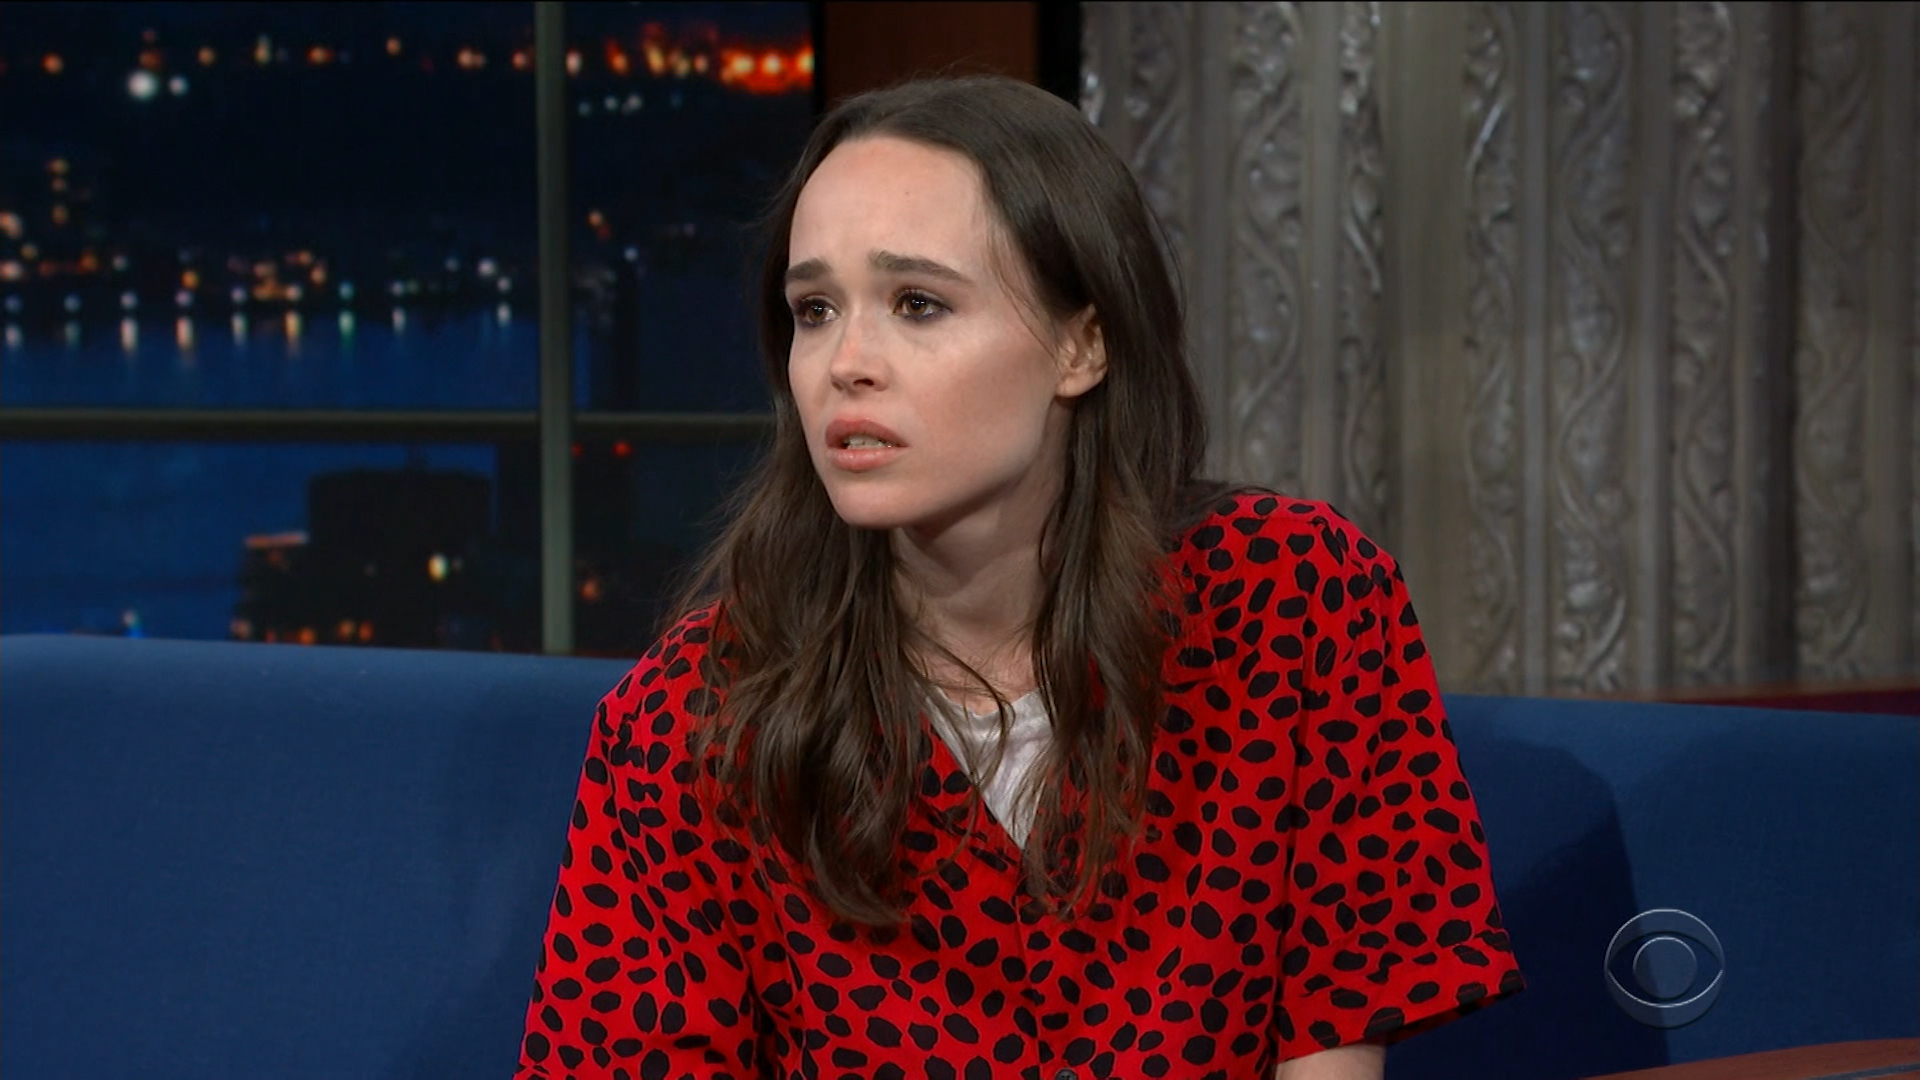 Ellen Page calls out Mike Pence for anti-LGBT outlook - CNN Video